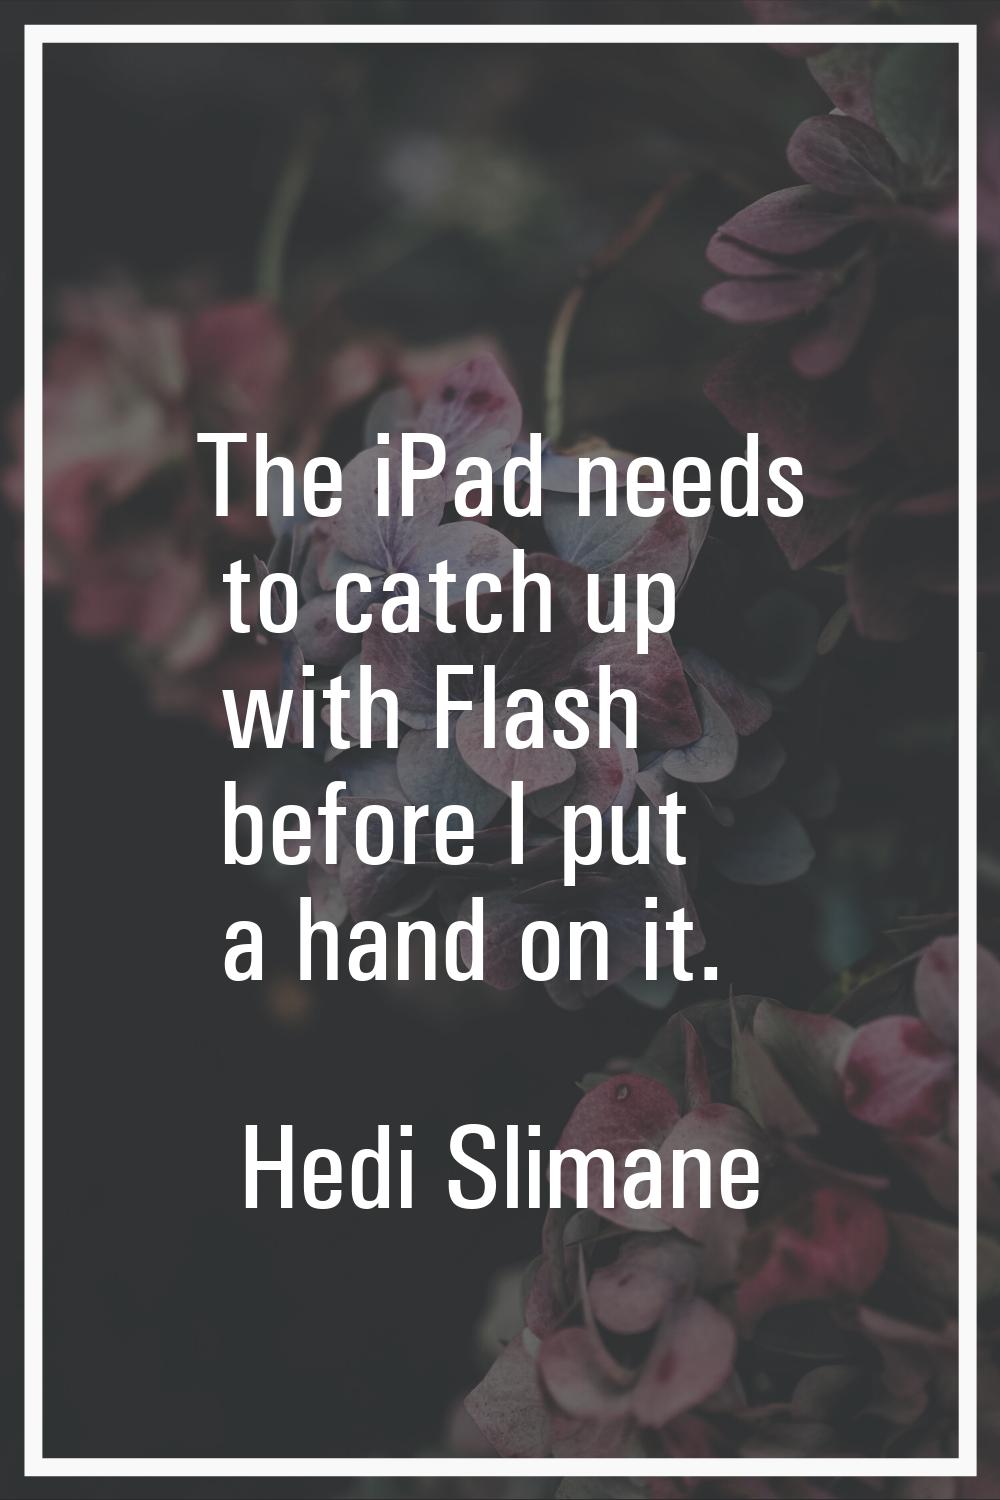 The iPad needs to catch up with Flash before I put a hand on it.